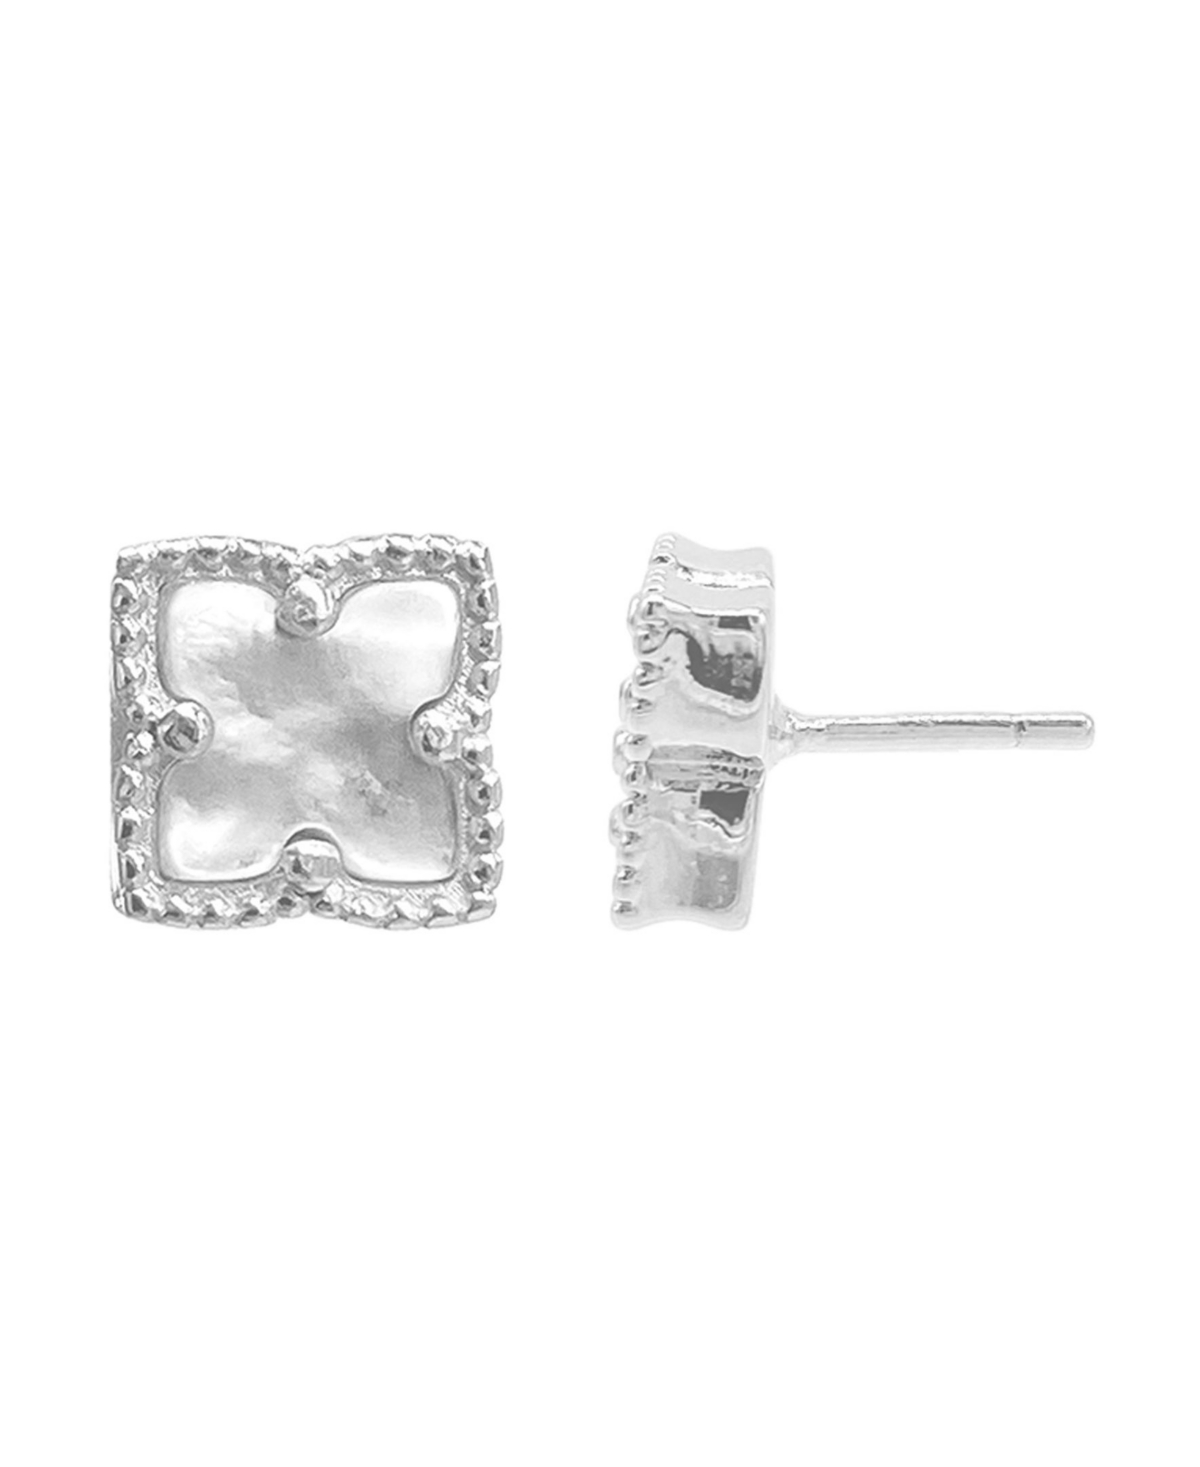 Shop Adornia Silver Plated Flower White Imitation Mother Of Pearl Stud Earrings